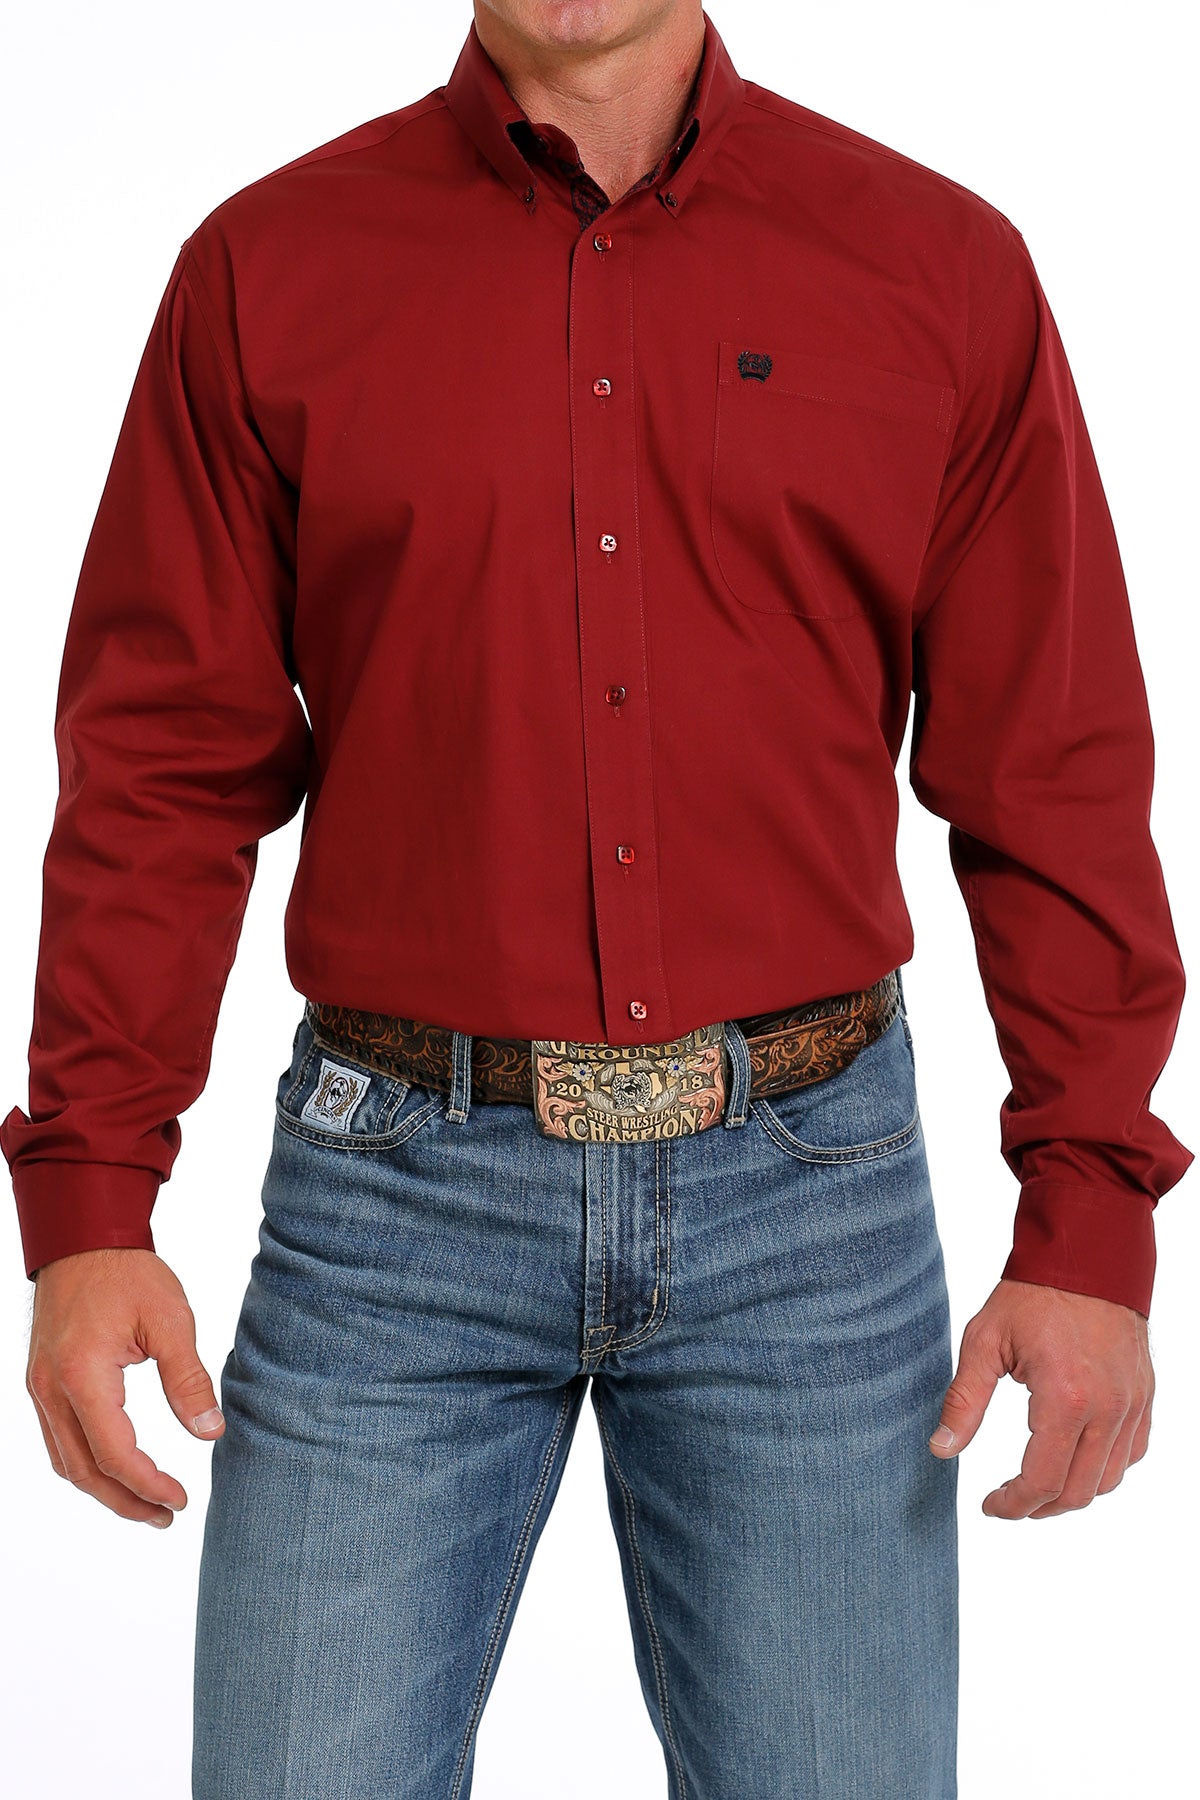 Men's Cinch MTW1105625 Red Classic Fit Solid Button Down Long Sleeve S